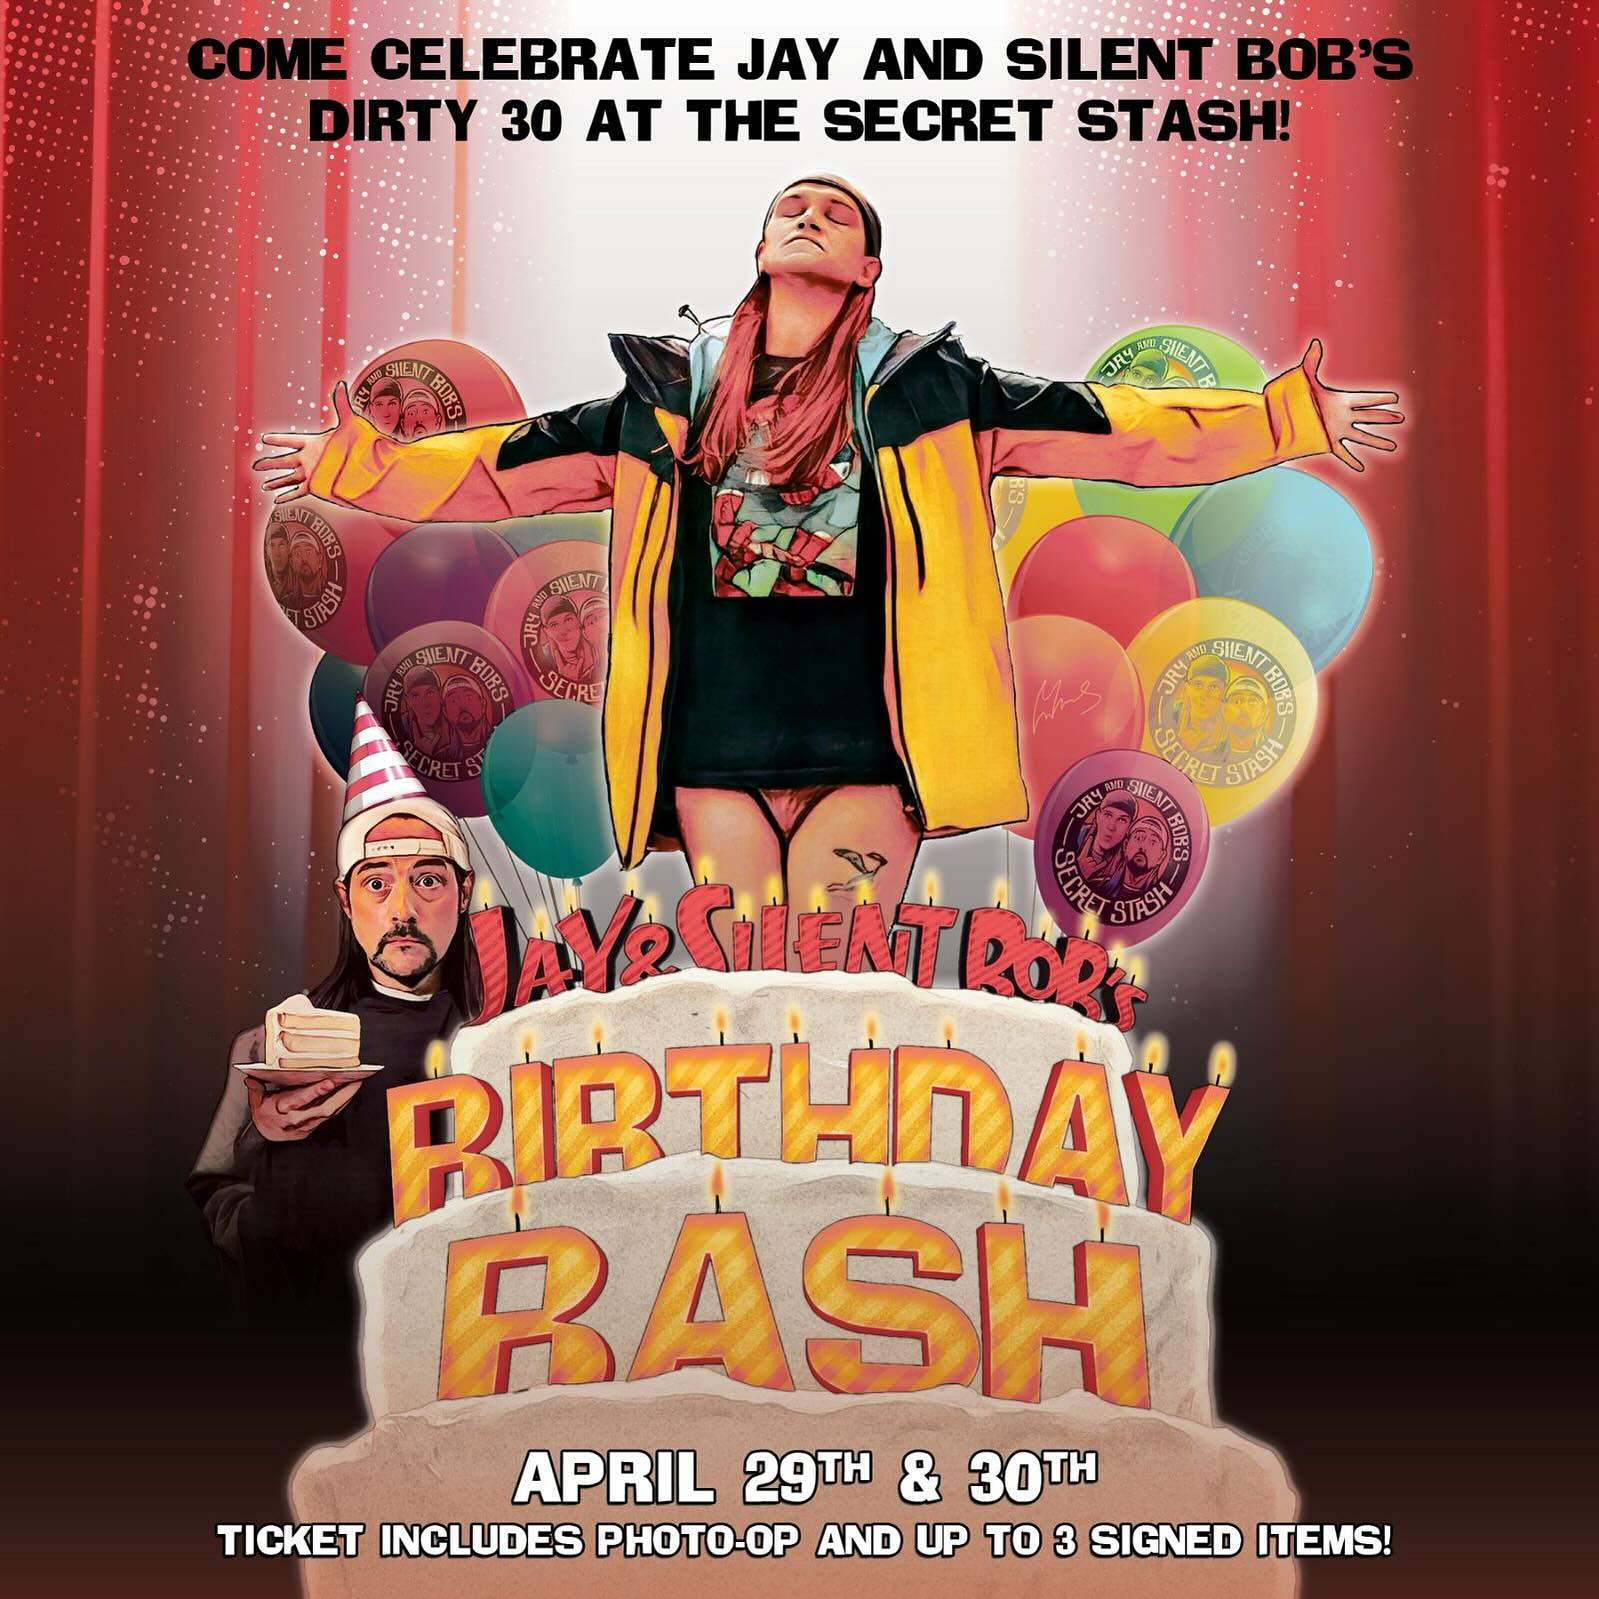 Promotional poster for jay and silent bob's birthday bash event with dates and offer details included.